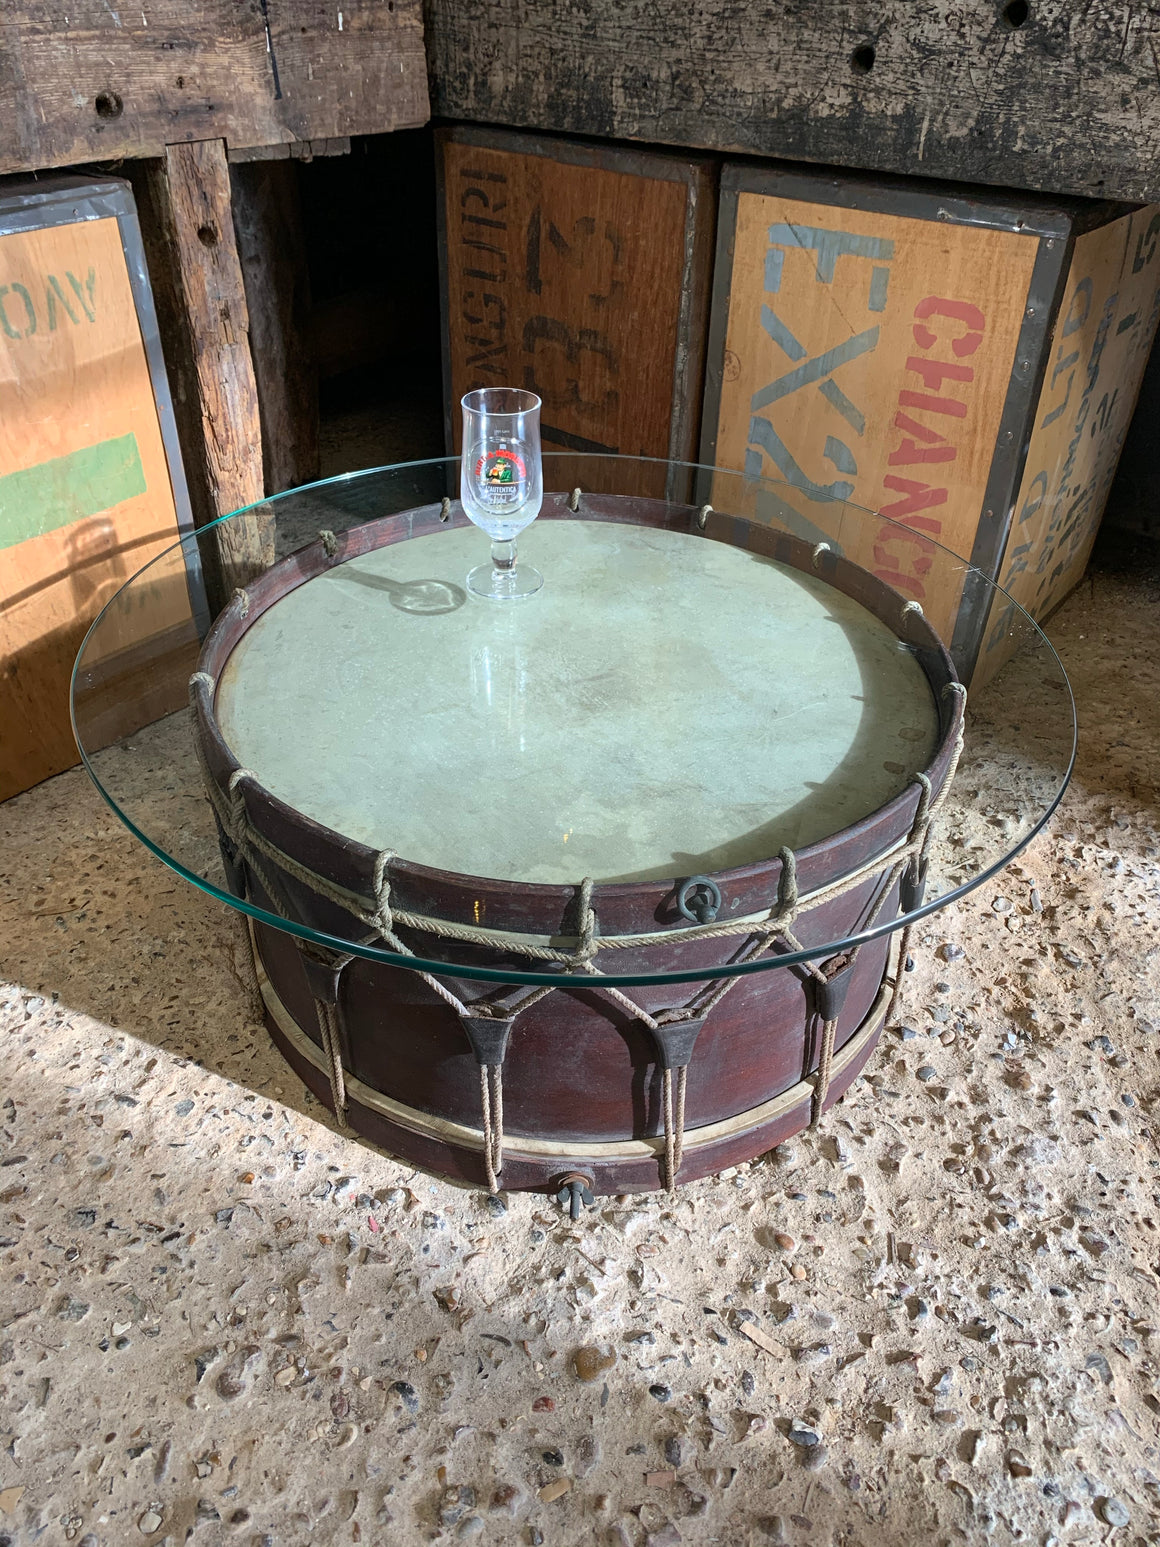 An antique wooden drum glass topped coffee table